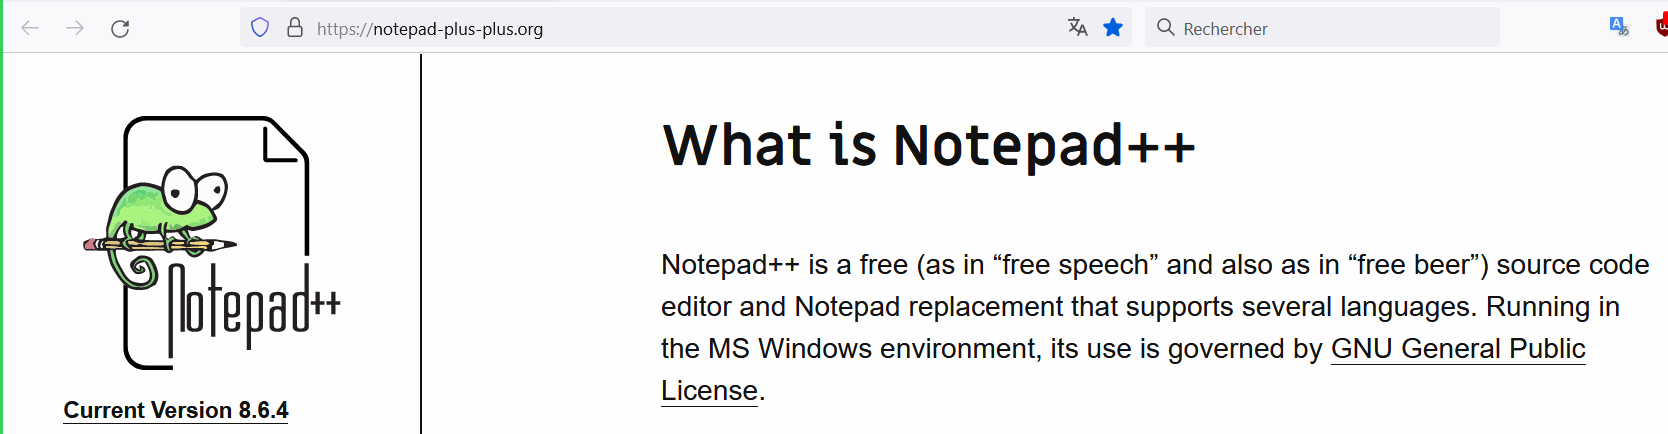 Notepad++ Capture.PNG